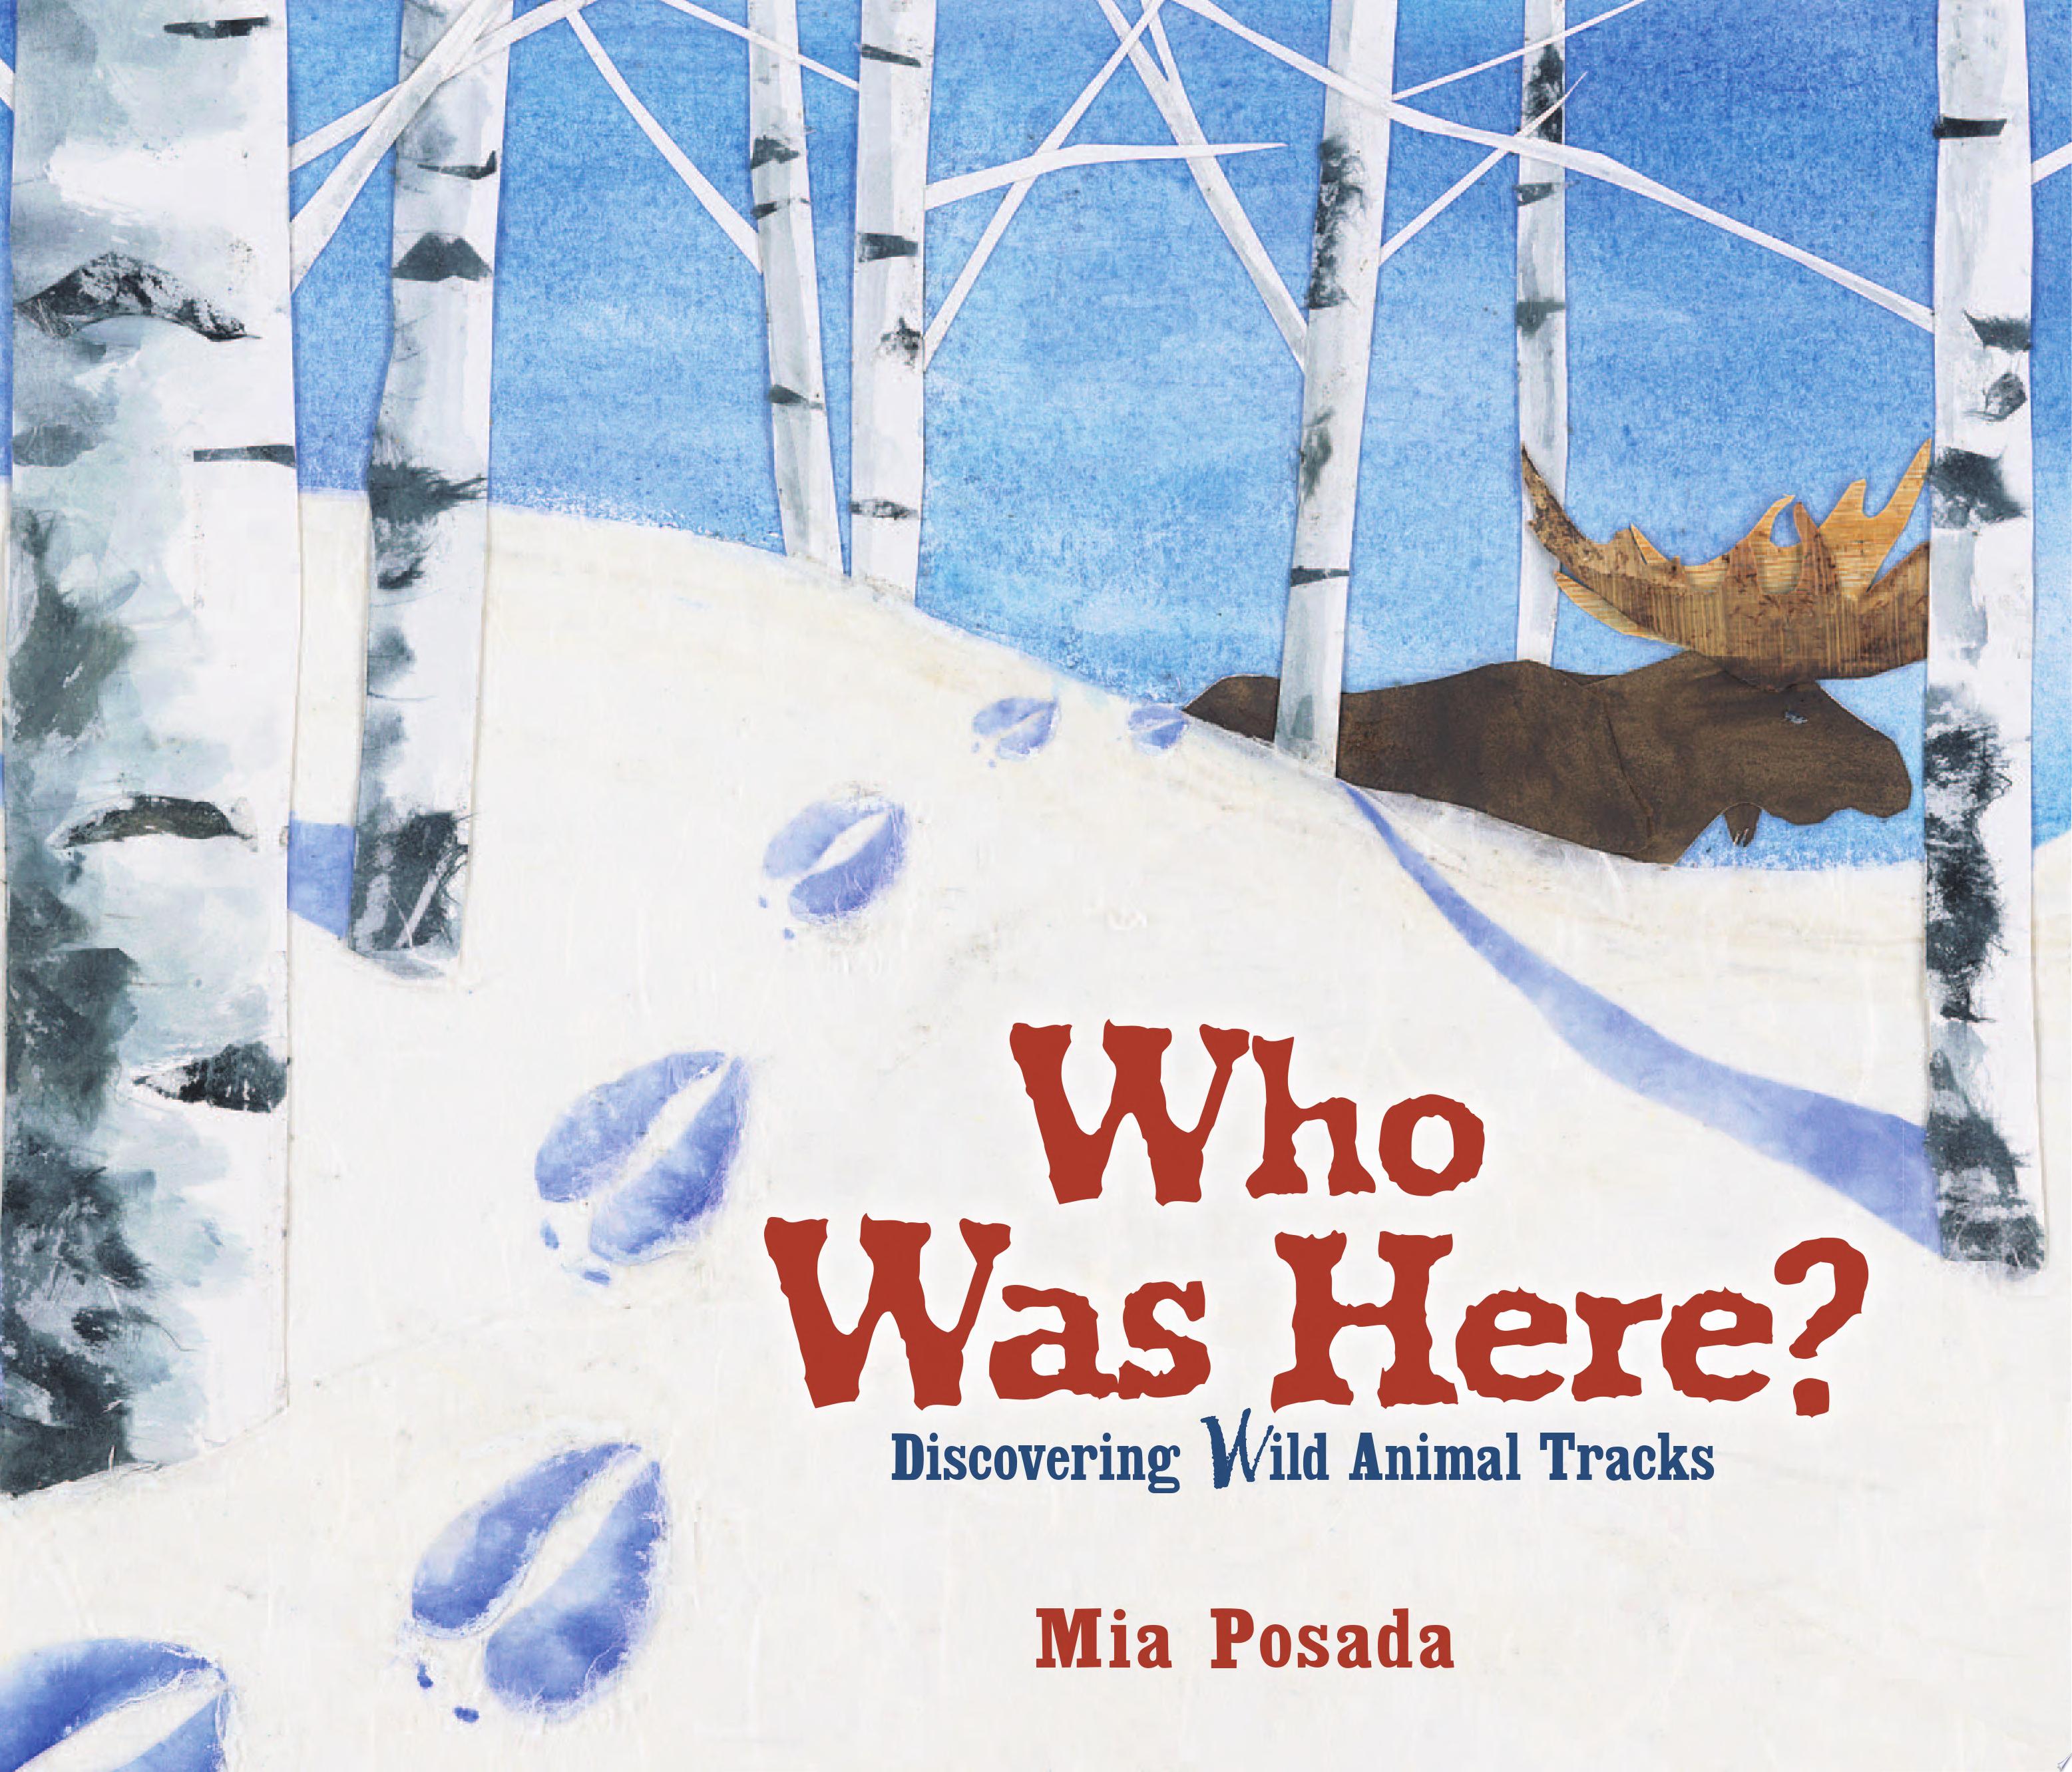 Image for "Who Was Here?"